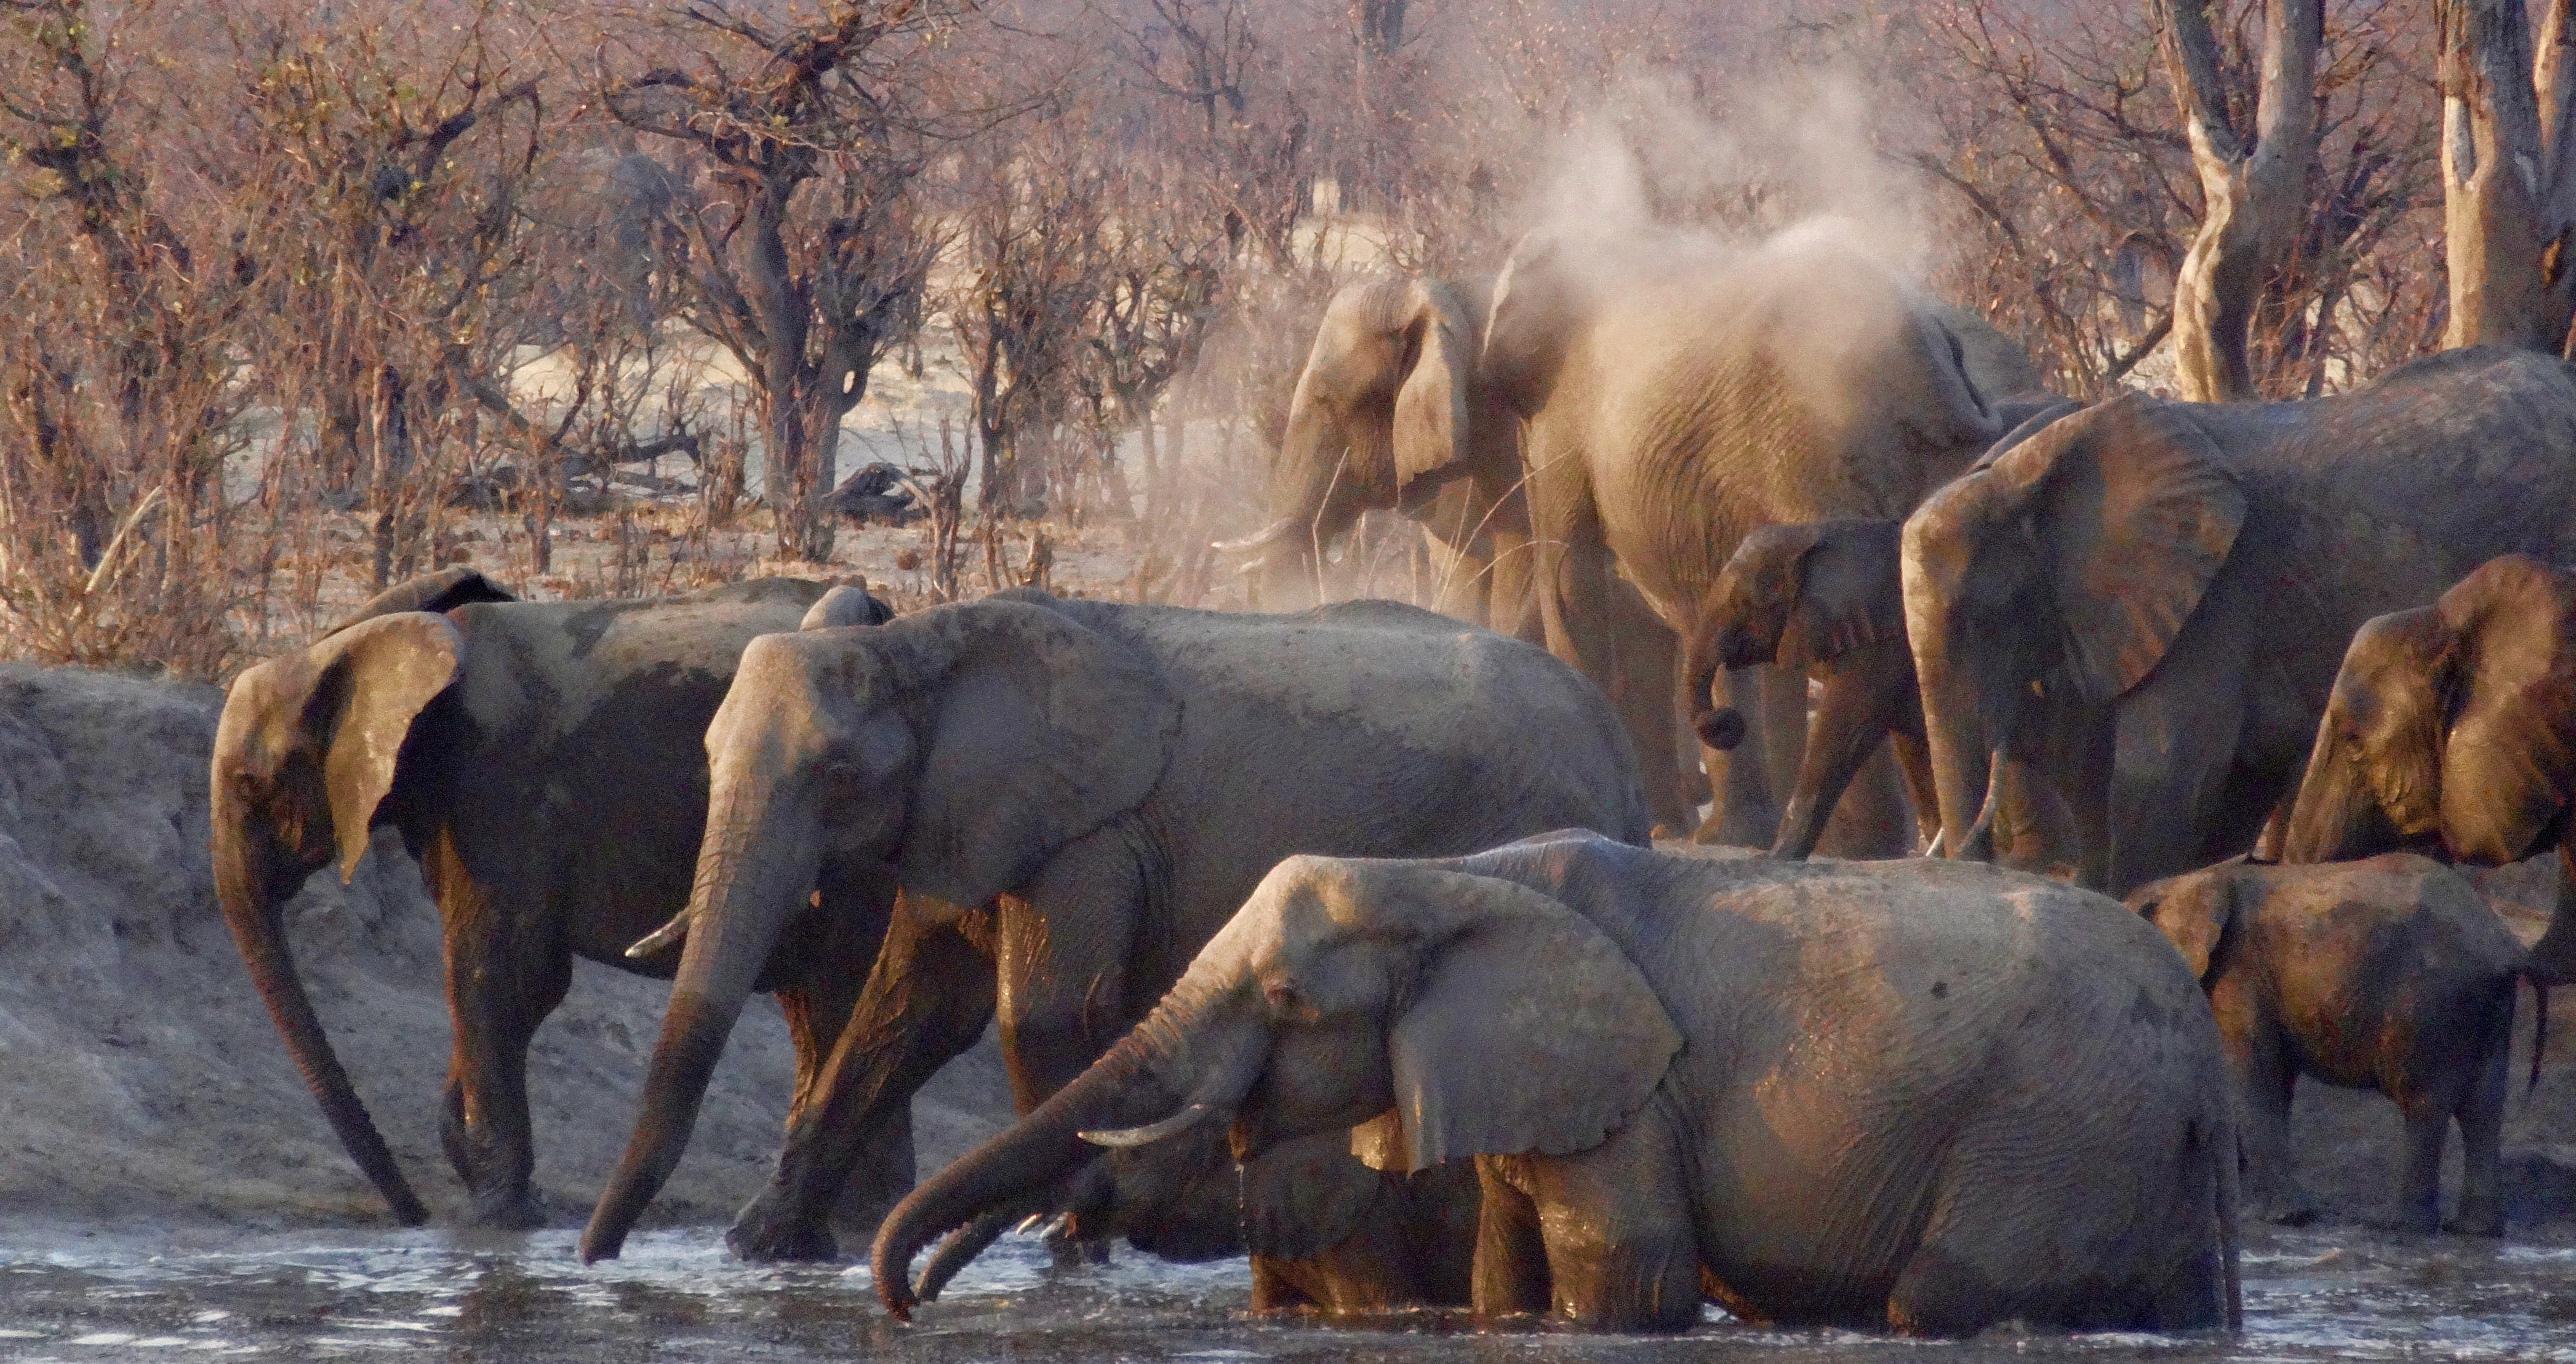 herd of elephants walking on grey body of water near trees during daytime